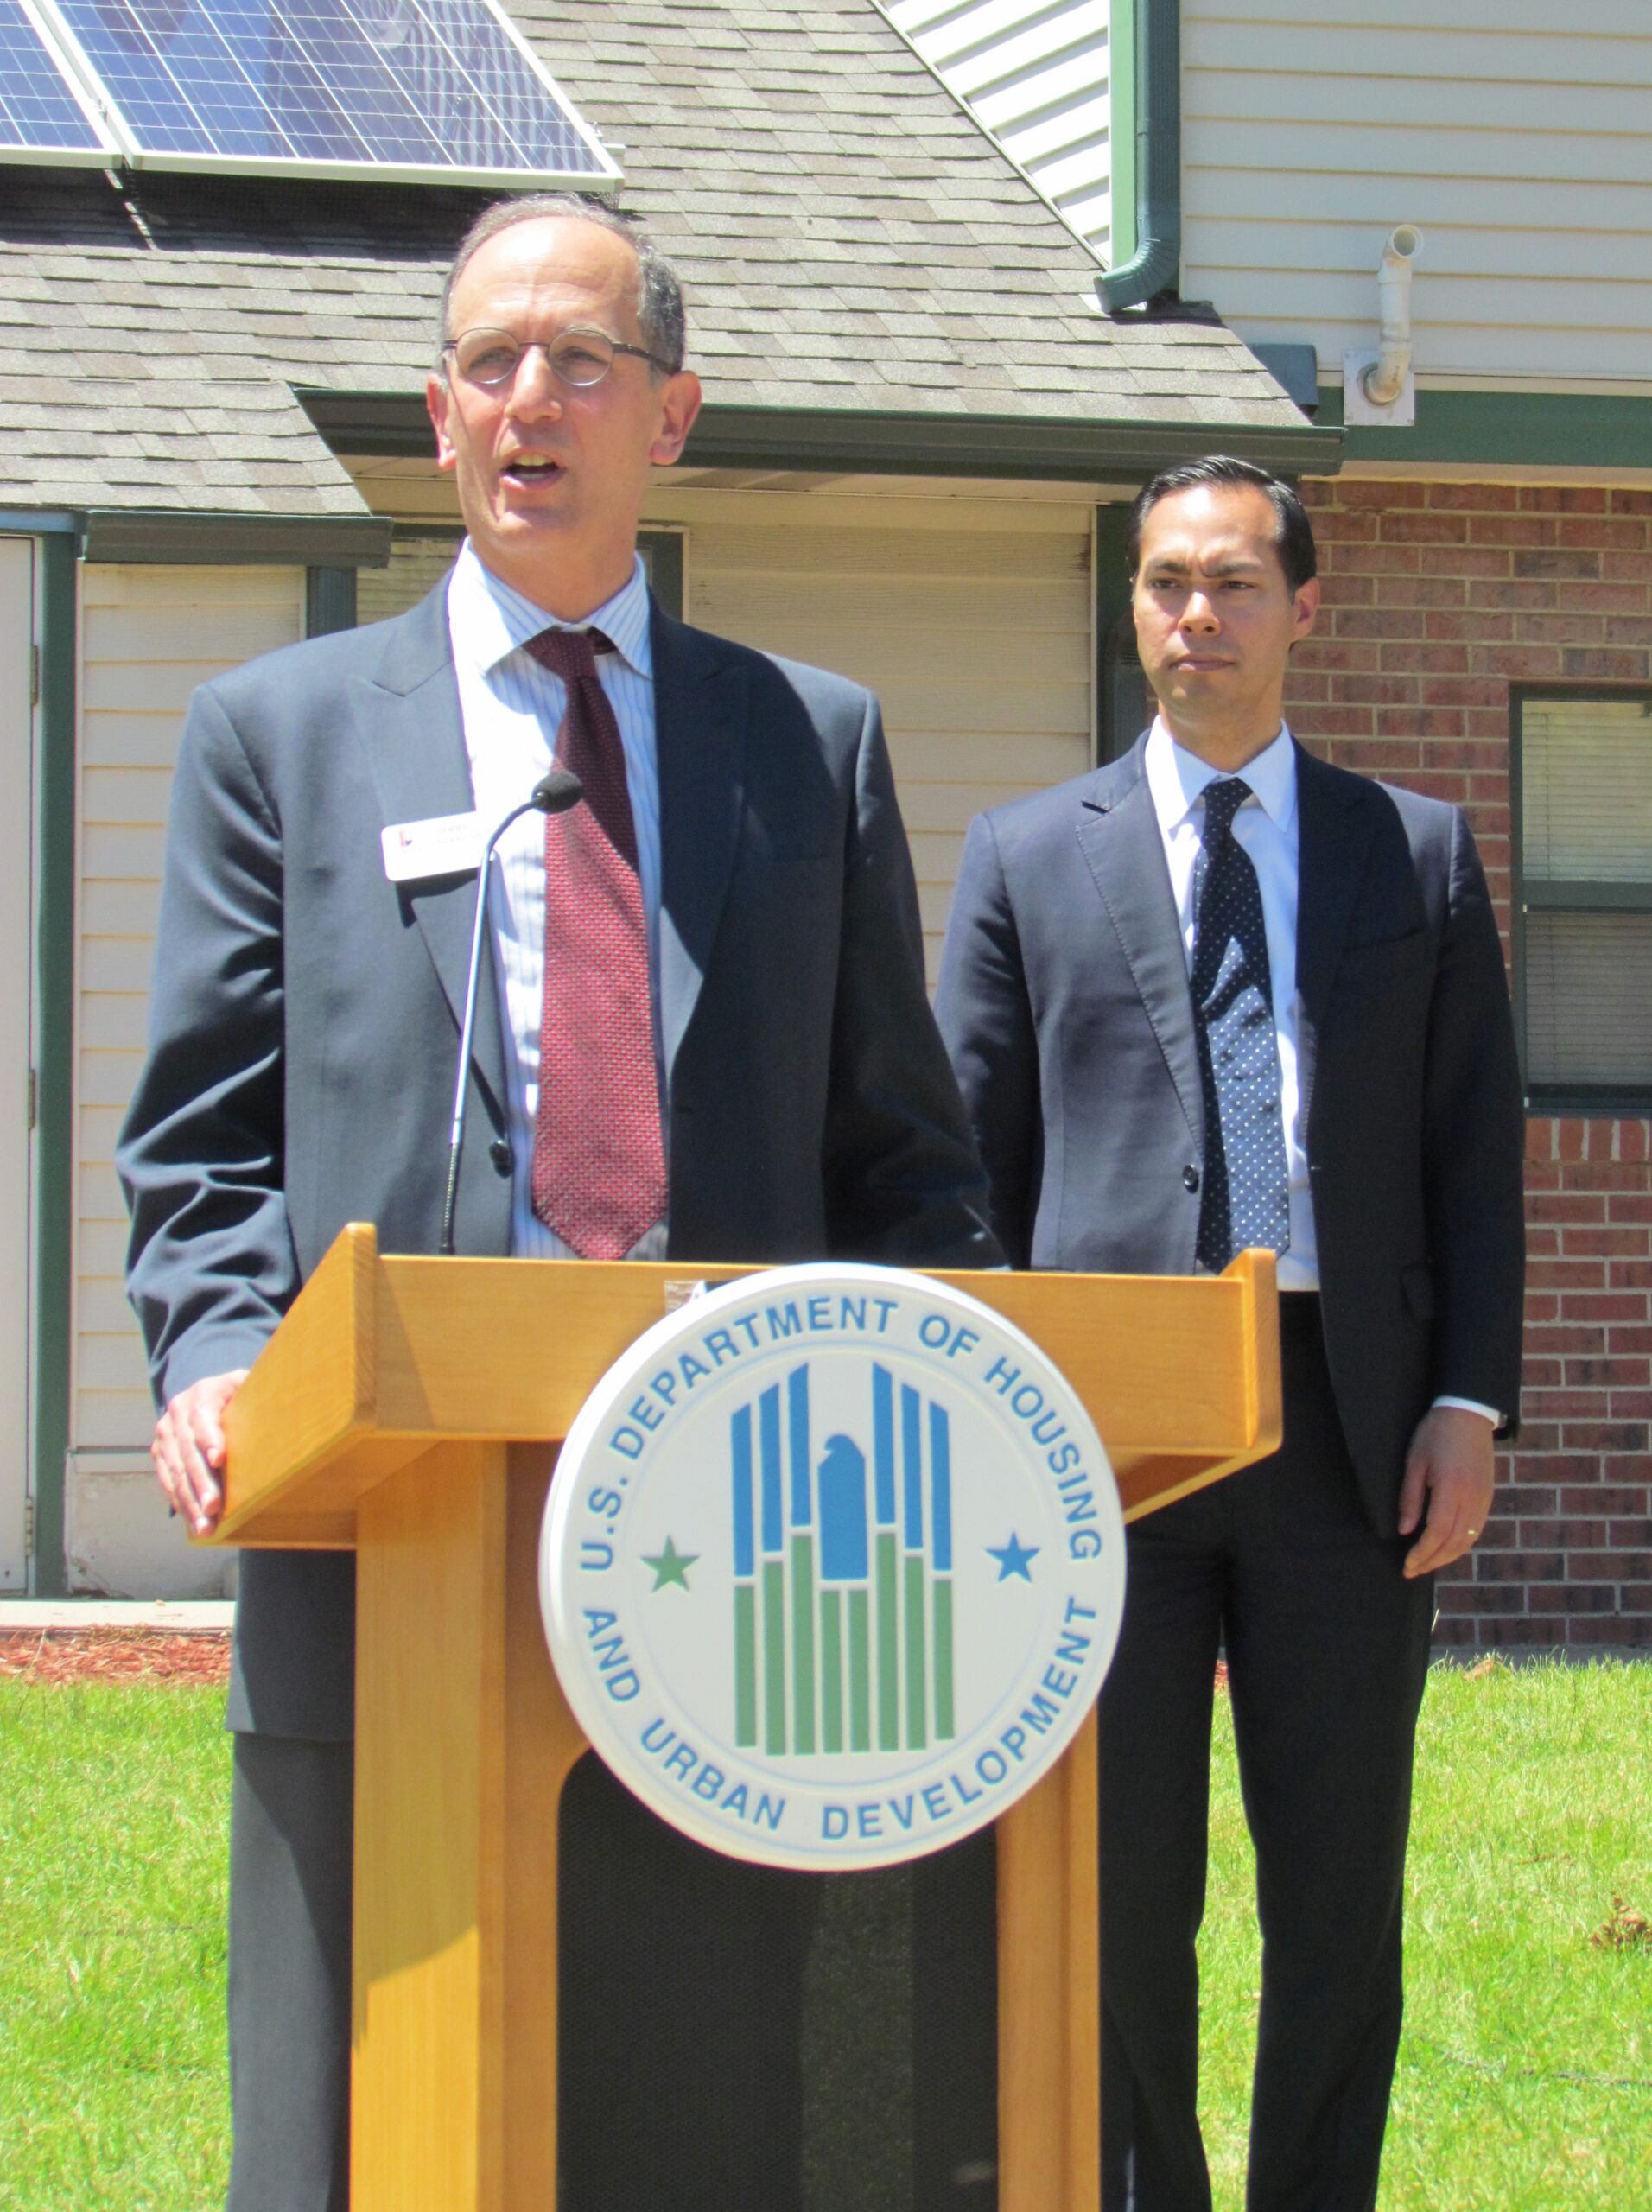 Jerry Tinianow standing at a podium speaking with then-Secretary Julian Castro of the U.S. Department of Housing and Urban Development standing behind him